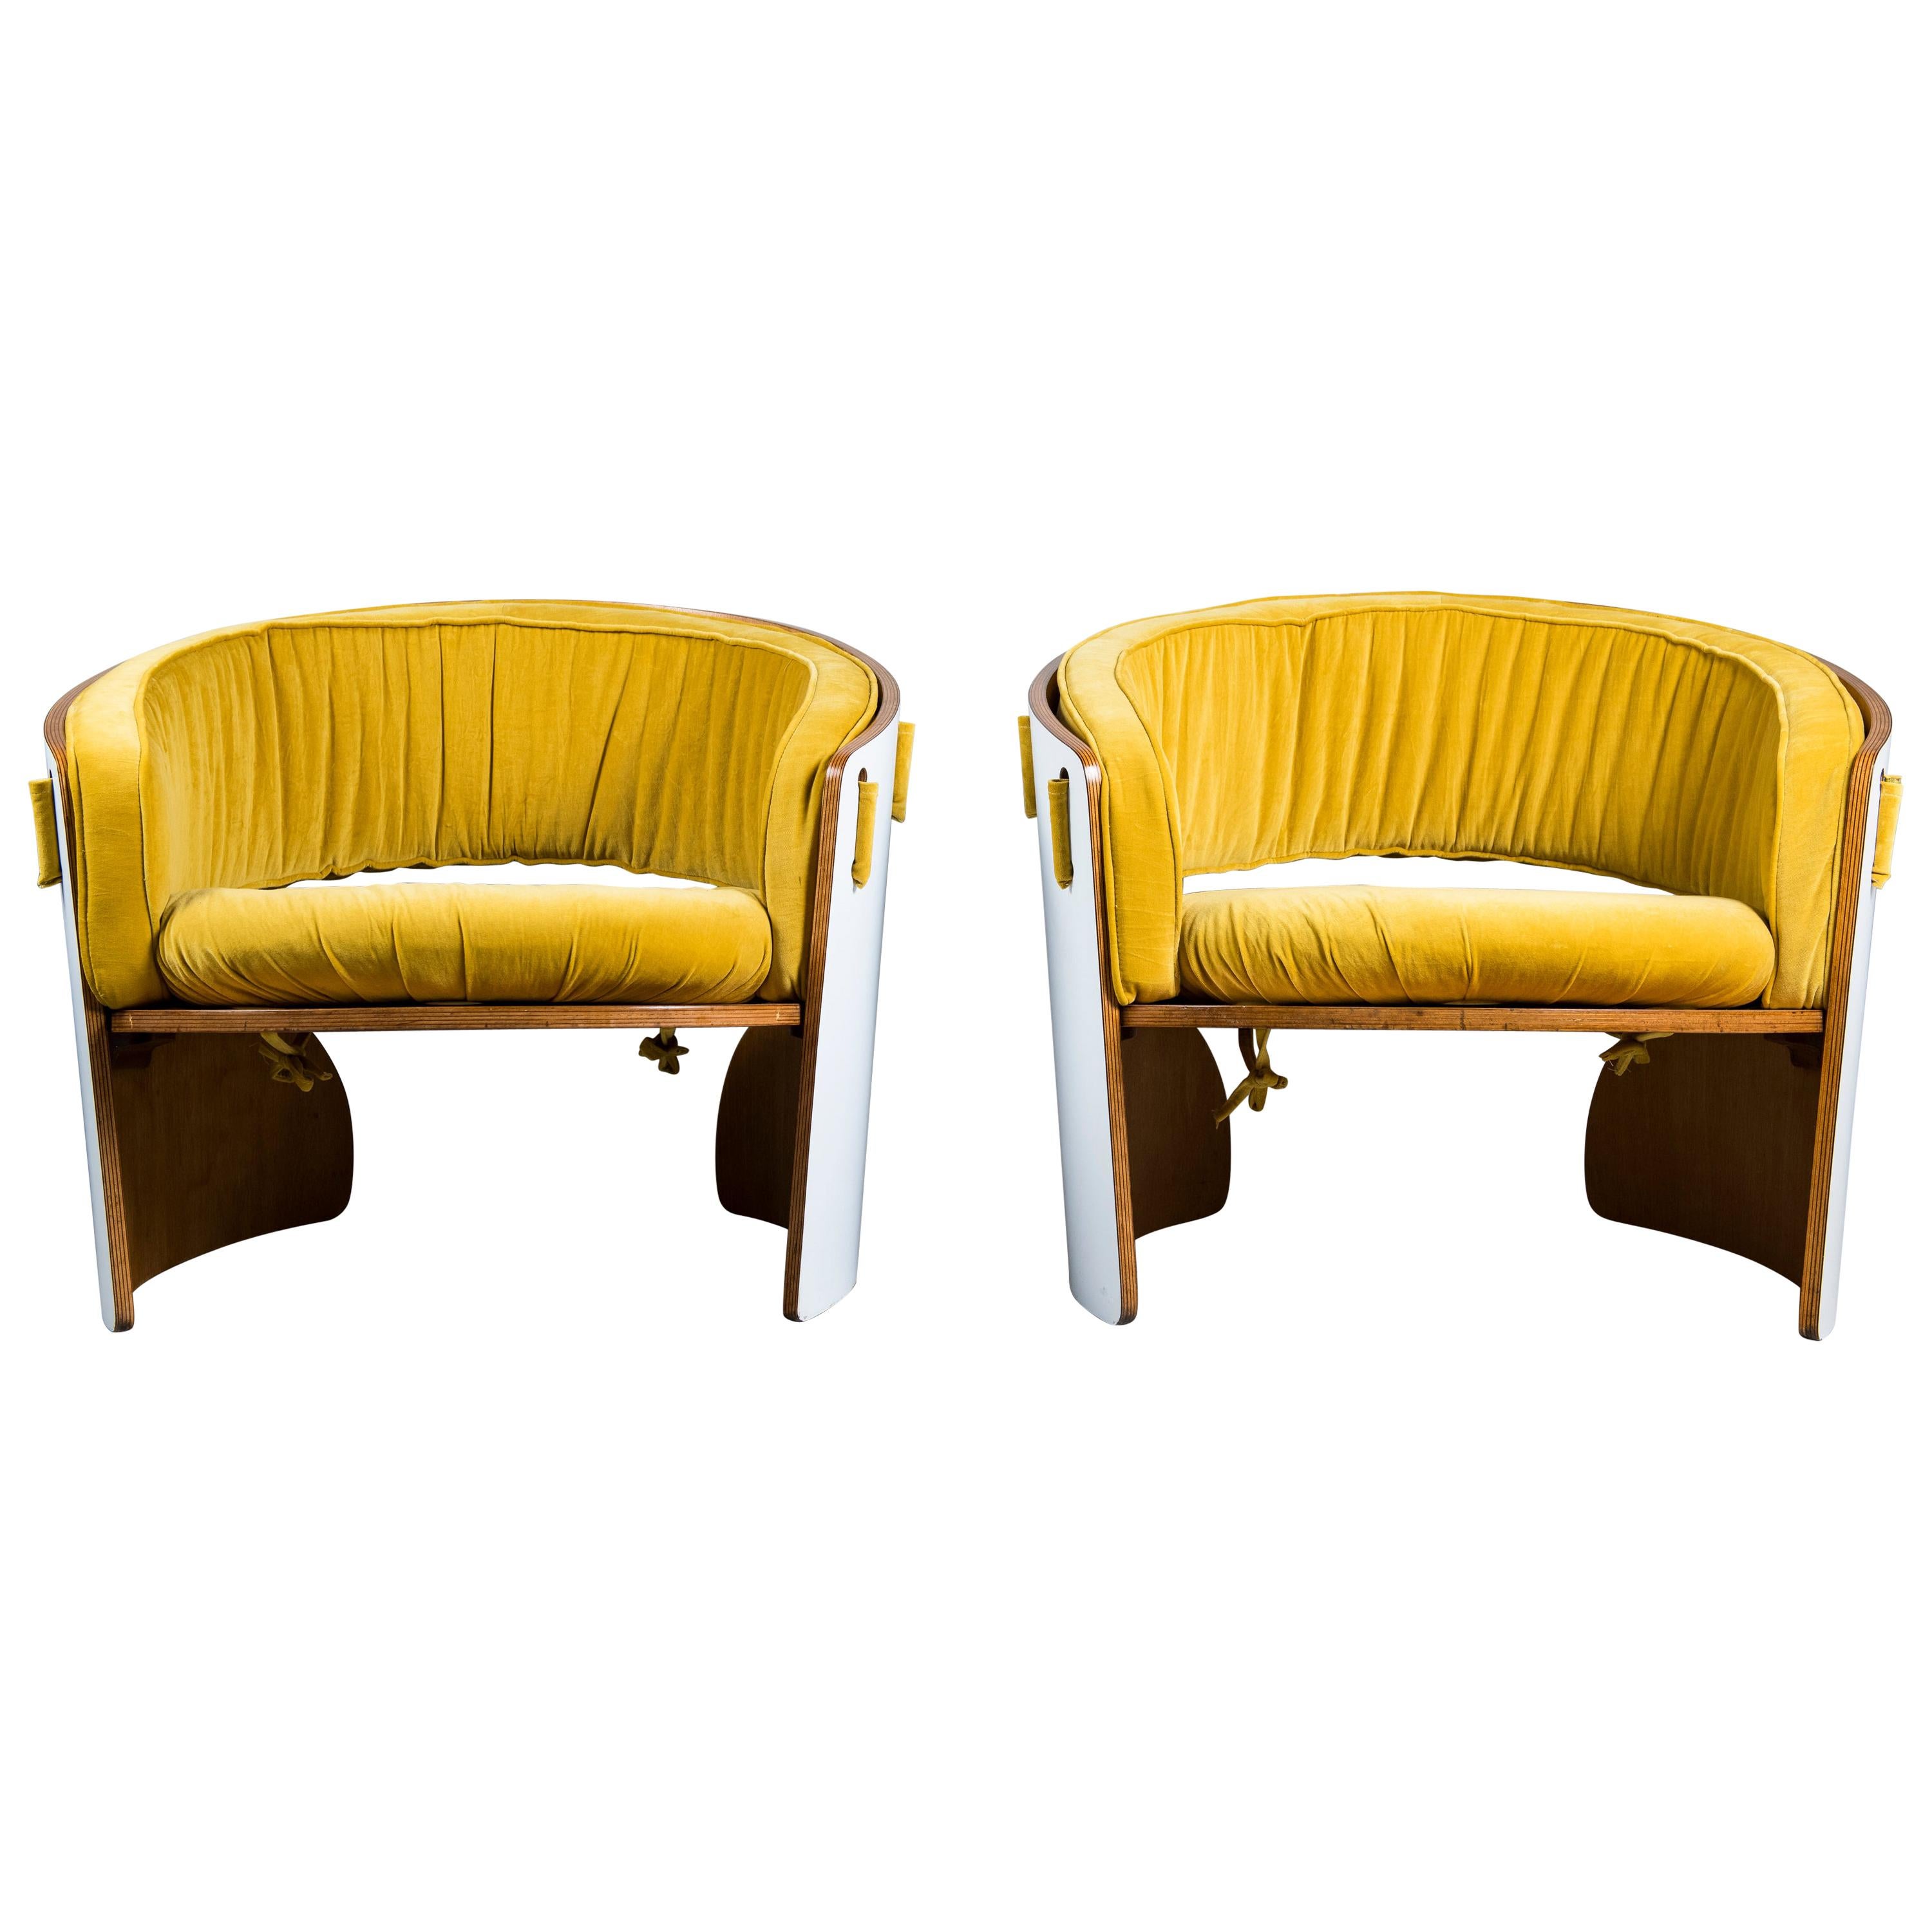 Pair of Wood, Formica and Velvet Armchairs, Designed by Ricardo Blanco, 1969 For Sale